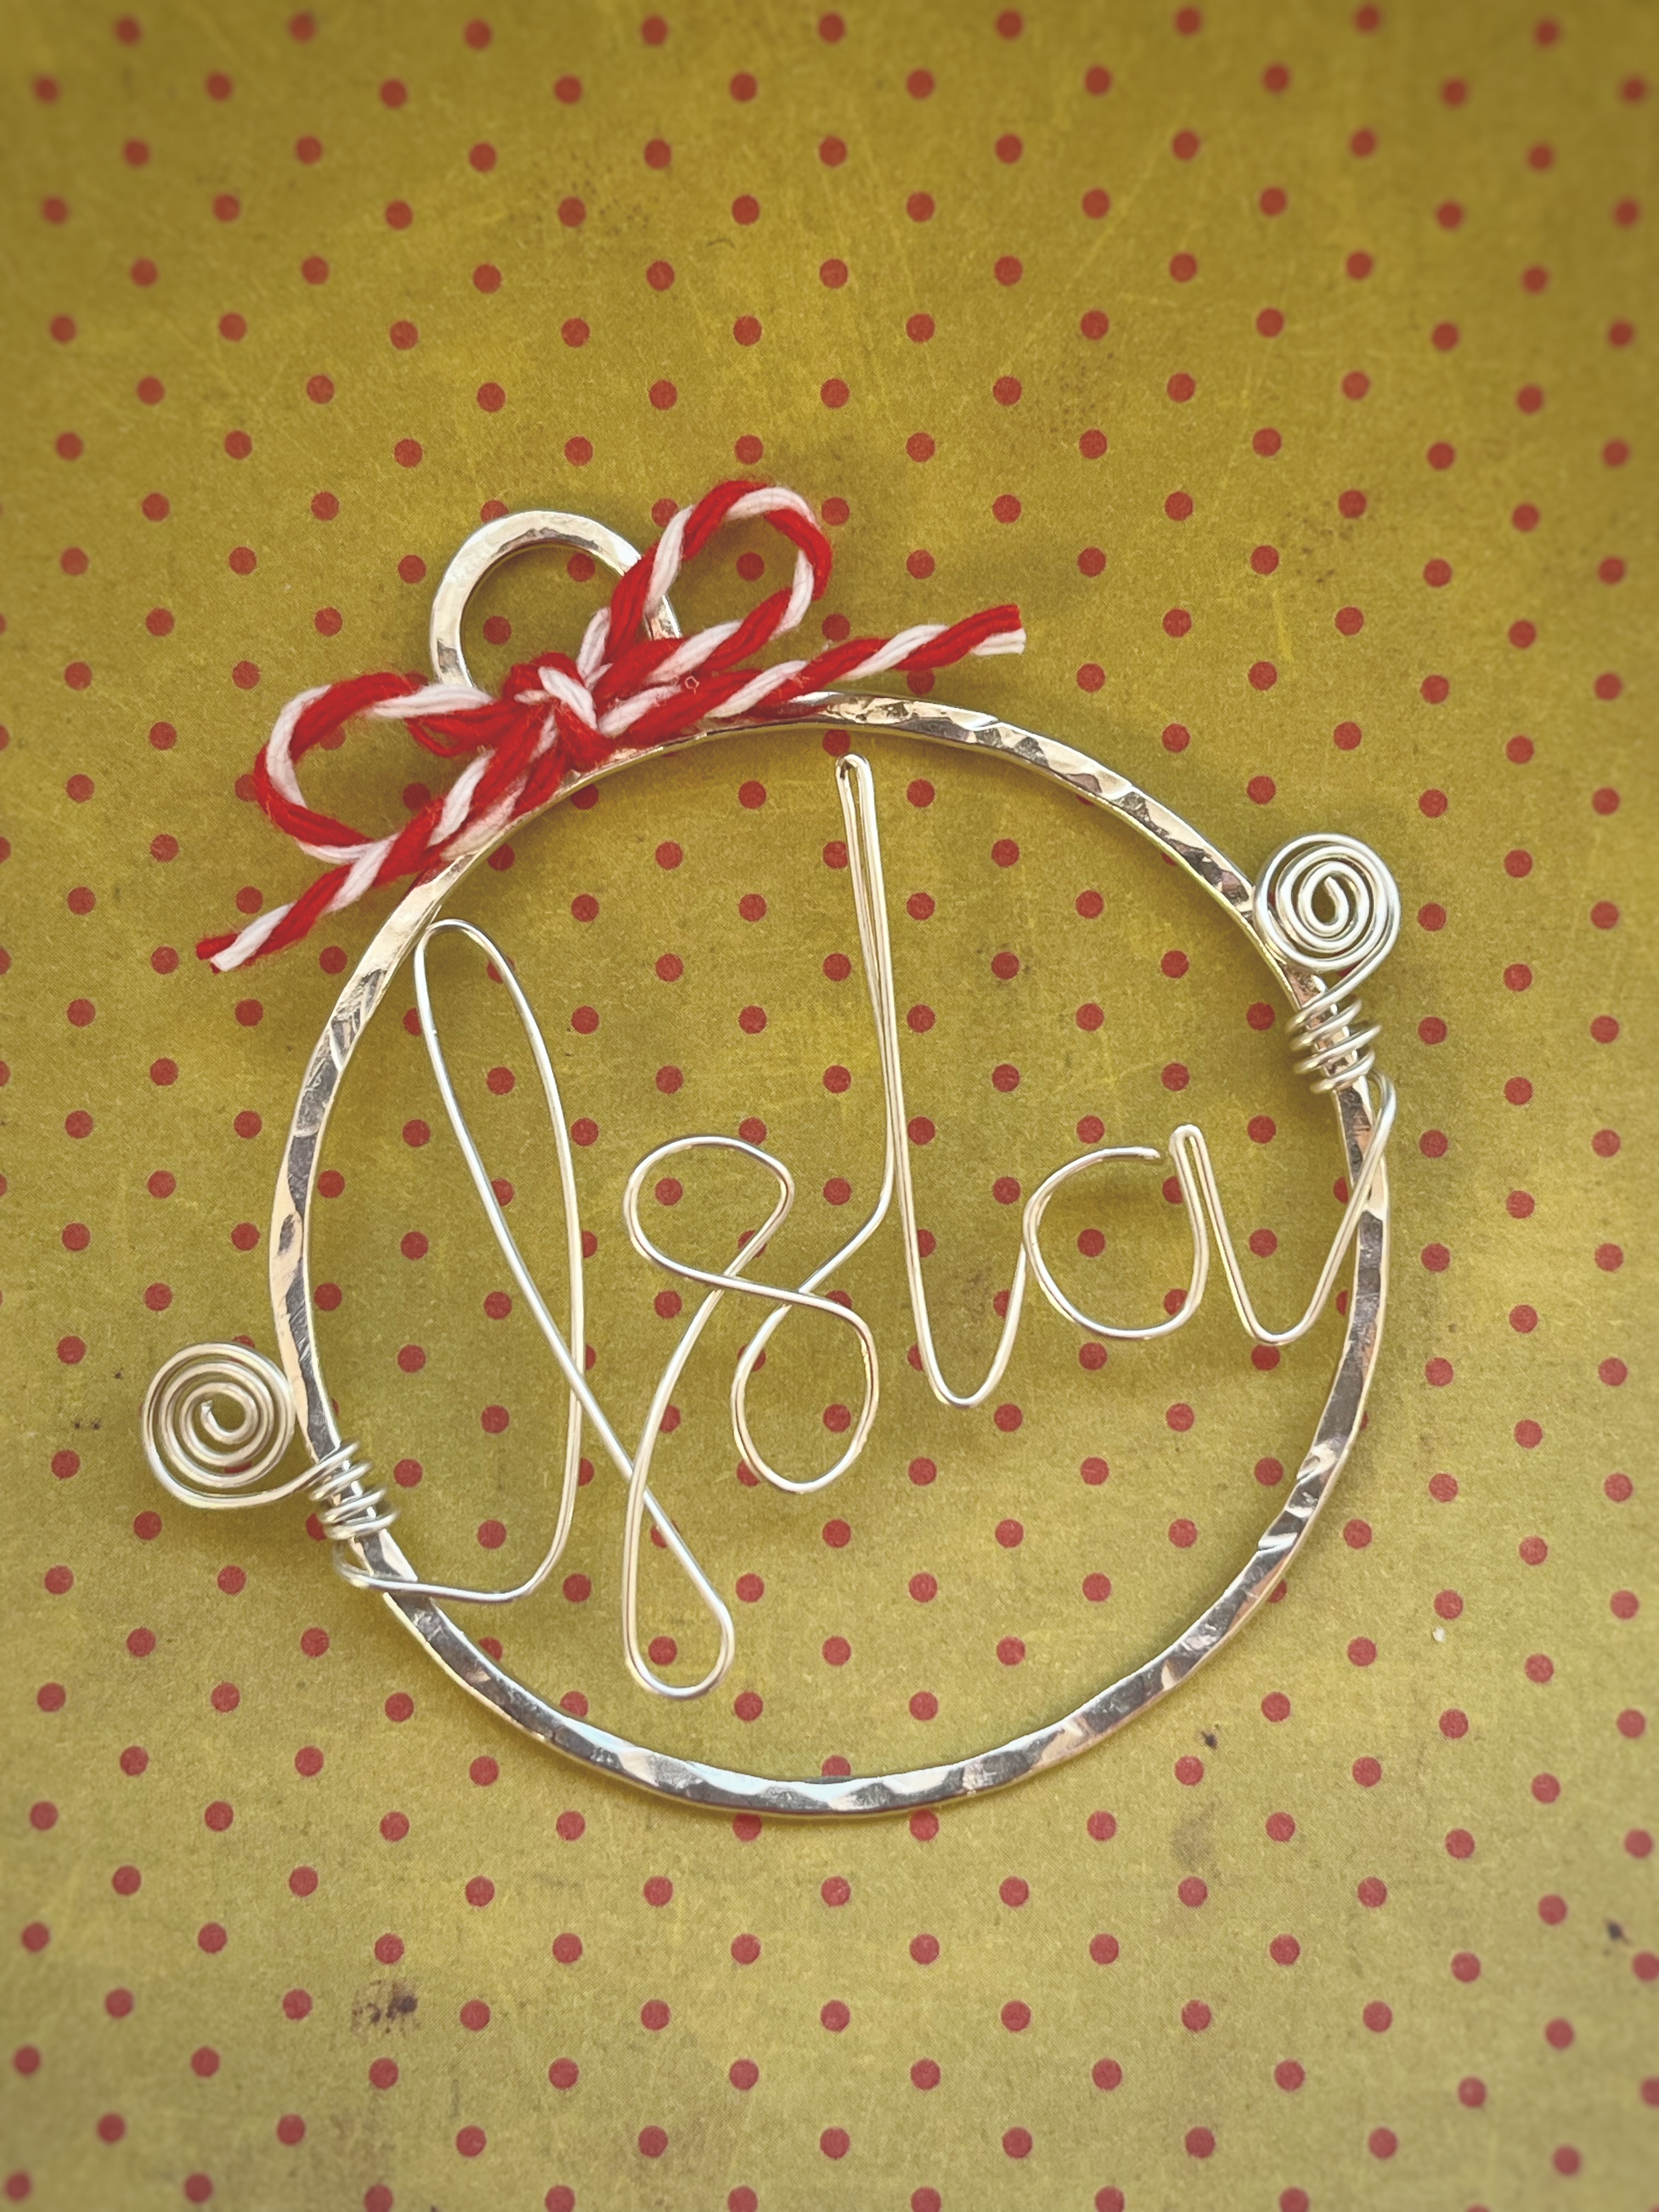 A ribbon or festive string added to the decoration. 